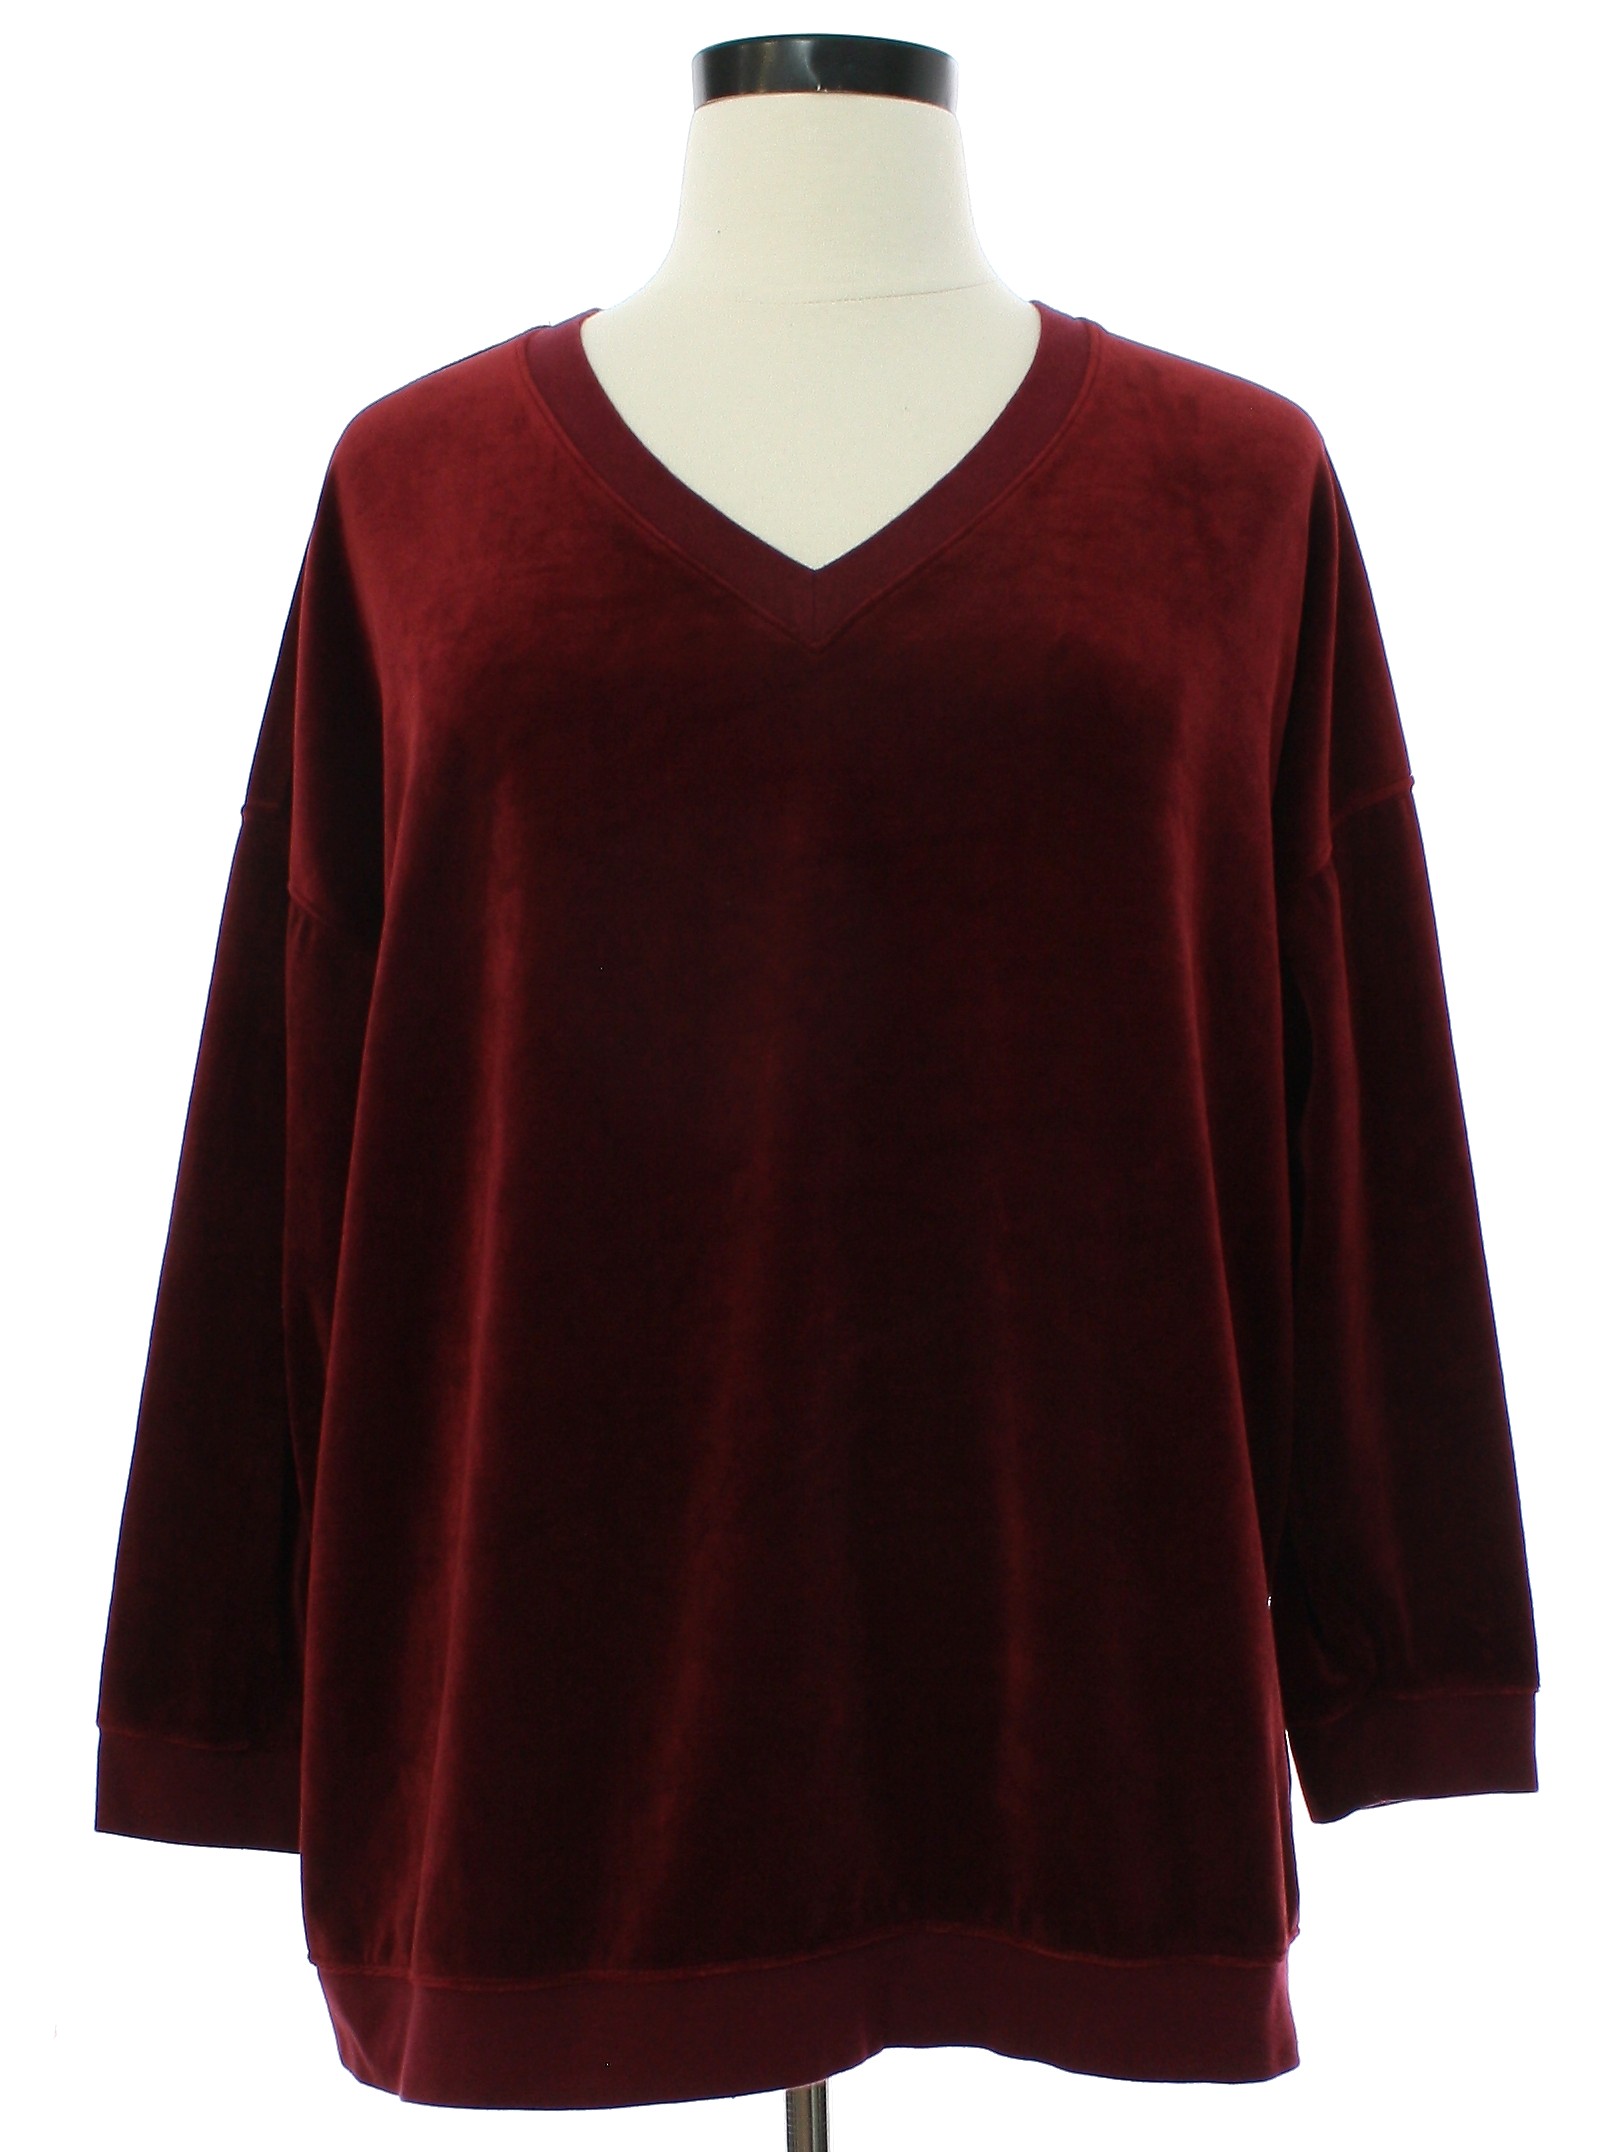 Shirt: 90s -Woman Within- Womens burgundy red background velour ribbed knit  cuff longsleeve pullover sweatshirt. Veed ribbed knit neckline, no pockets  and rib knit hemline.